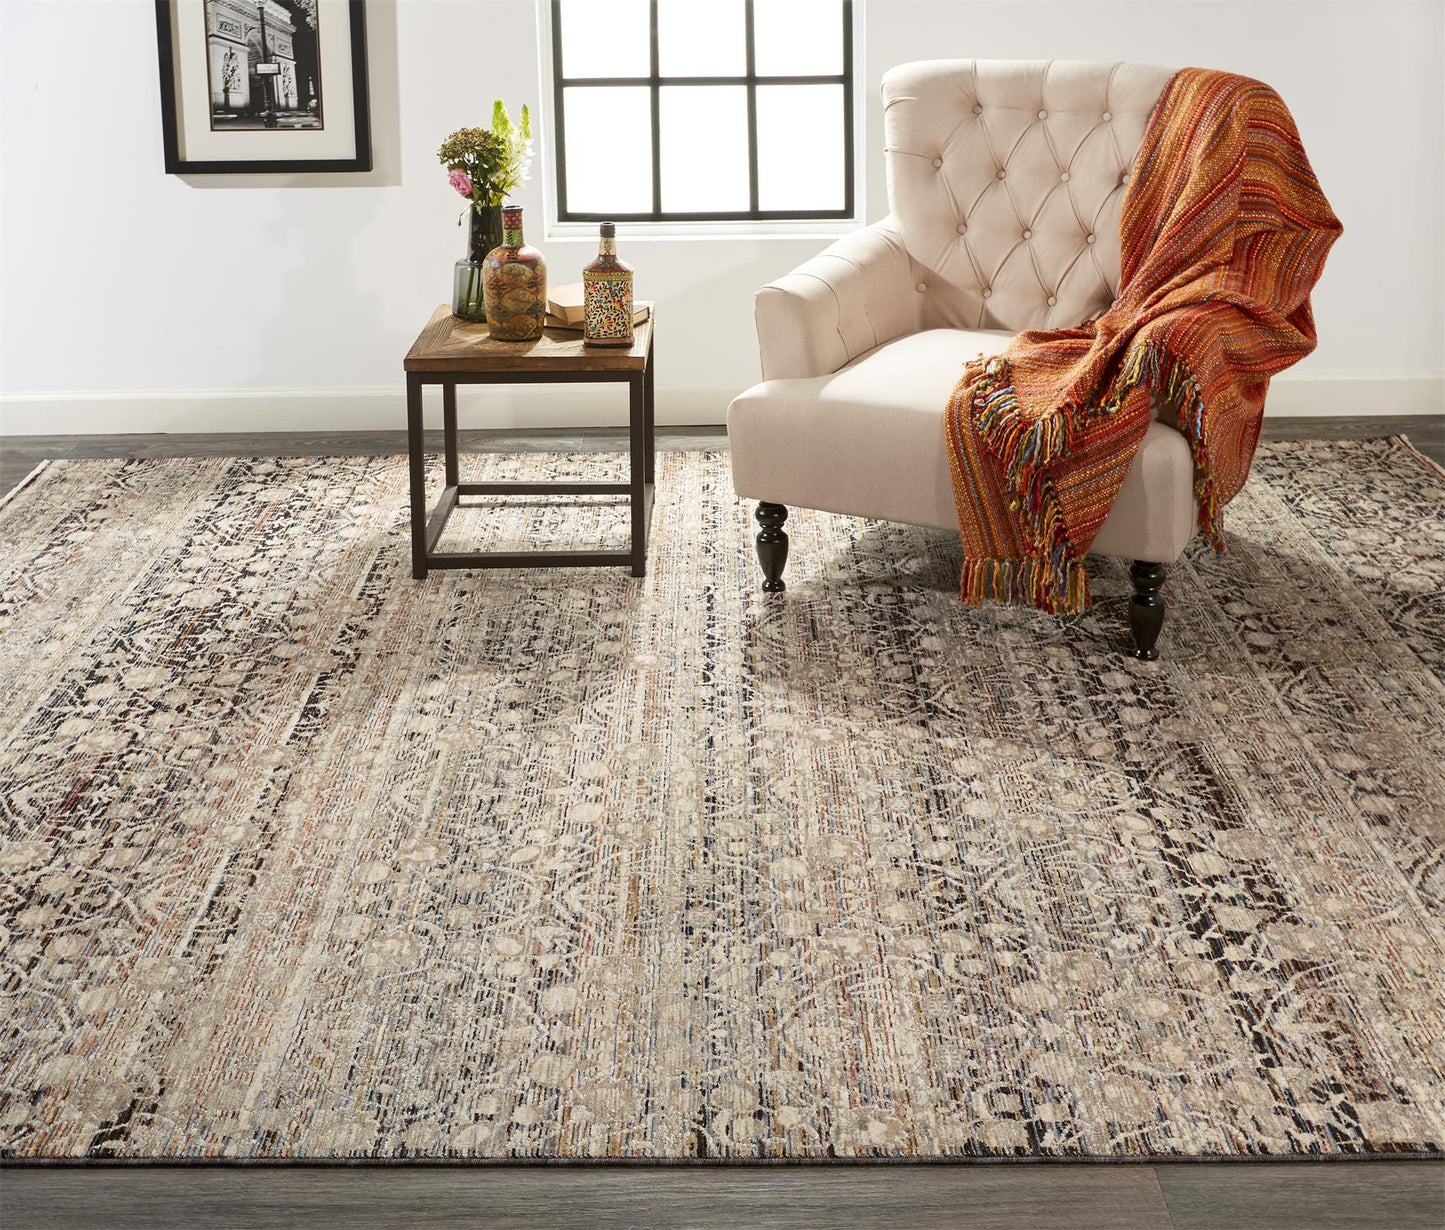 2' X 3' Gray Ivory And Tan Abstract Distressed Area Rug With Fringe